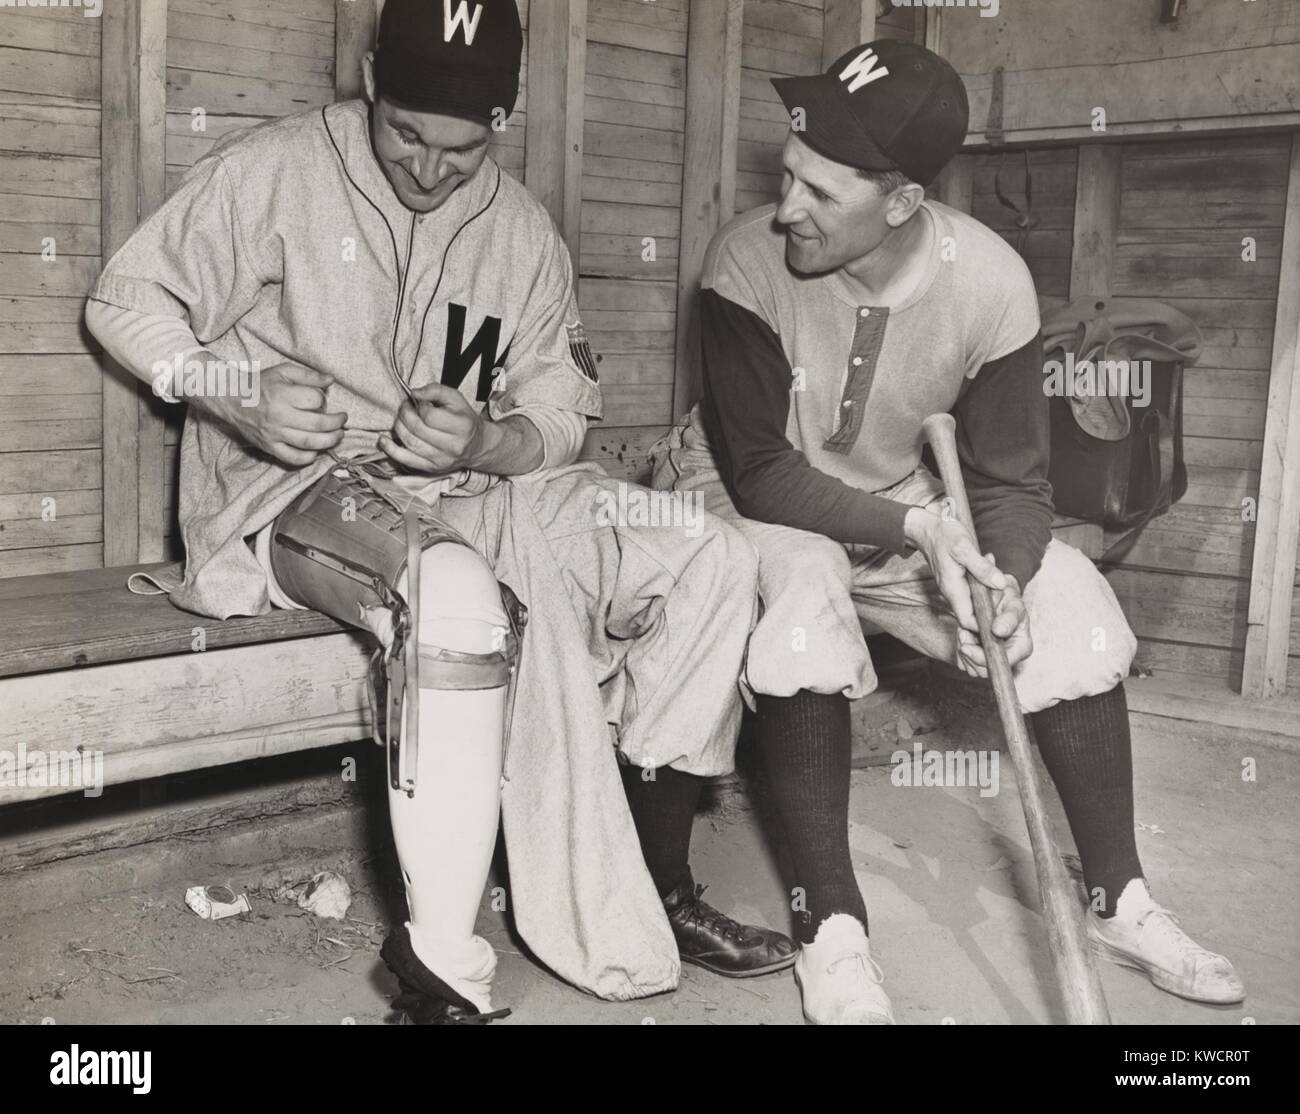 Washington Senators pitcher, Lt. Bert R. Shepard, as Manager Ossie Bluege looks on. March 30, 1945. The veteran pilot lost his lower right leg in WW2. He was the first amputee to pitch in a major league baseball game in August 1945. - (BSLOC 2014 17 168) Stock Photo